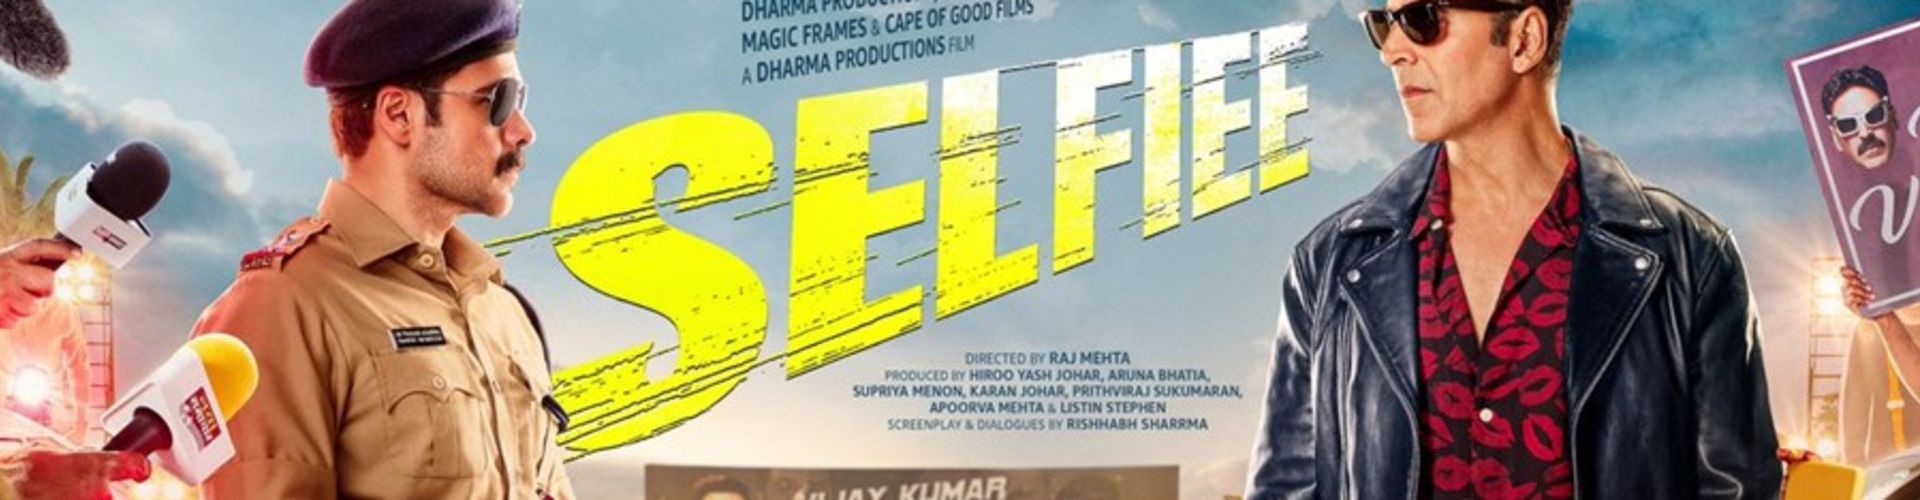 Star Studios Unveils New Poster For Selfiee